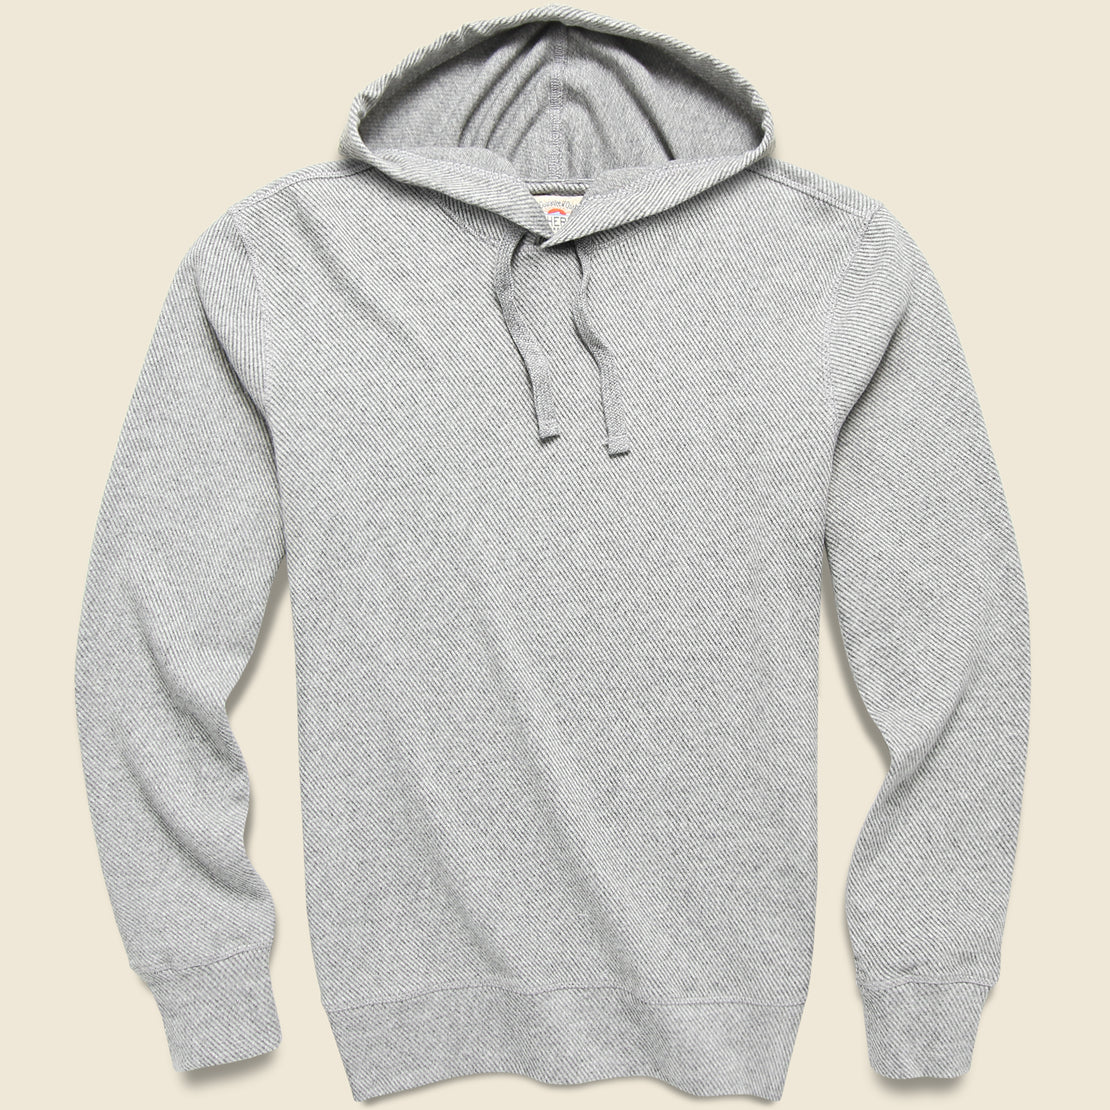 Faherty Legend Sweater Hoodie - Fossil Grey Twill